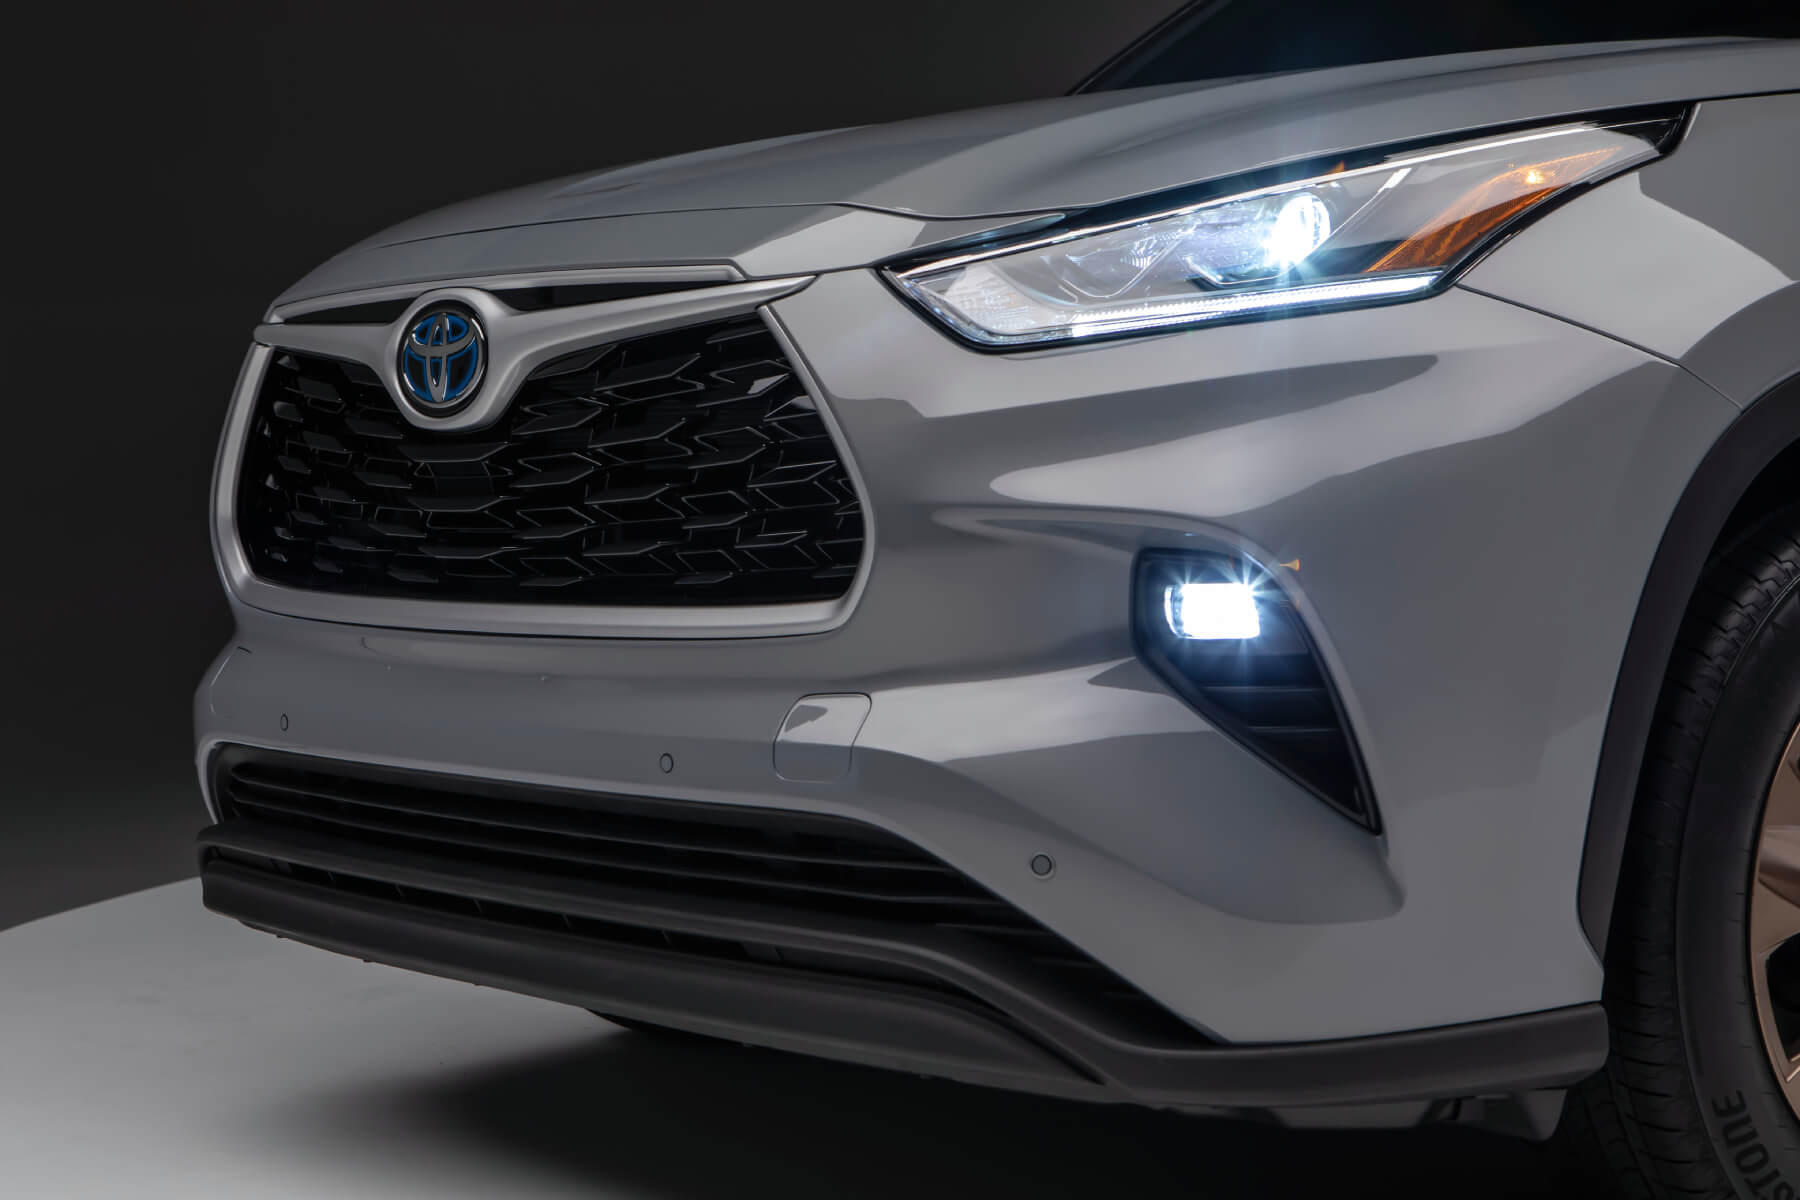 Front diagonal view of a grey 2023 Highlander Hybrid with headlamps and fog lamps illuminated. This model is one of the best Toyota hybrid models